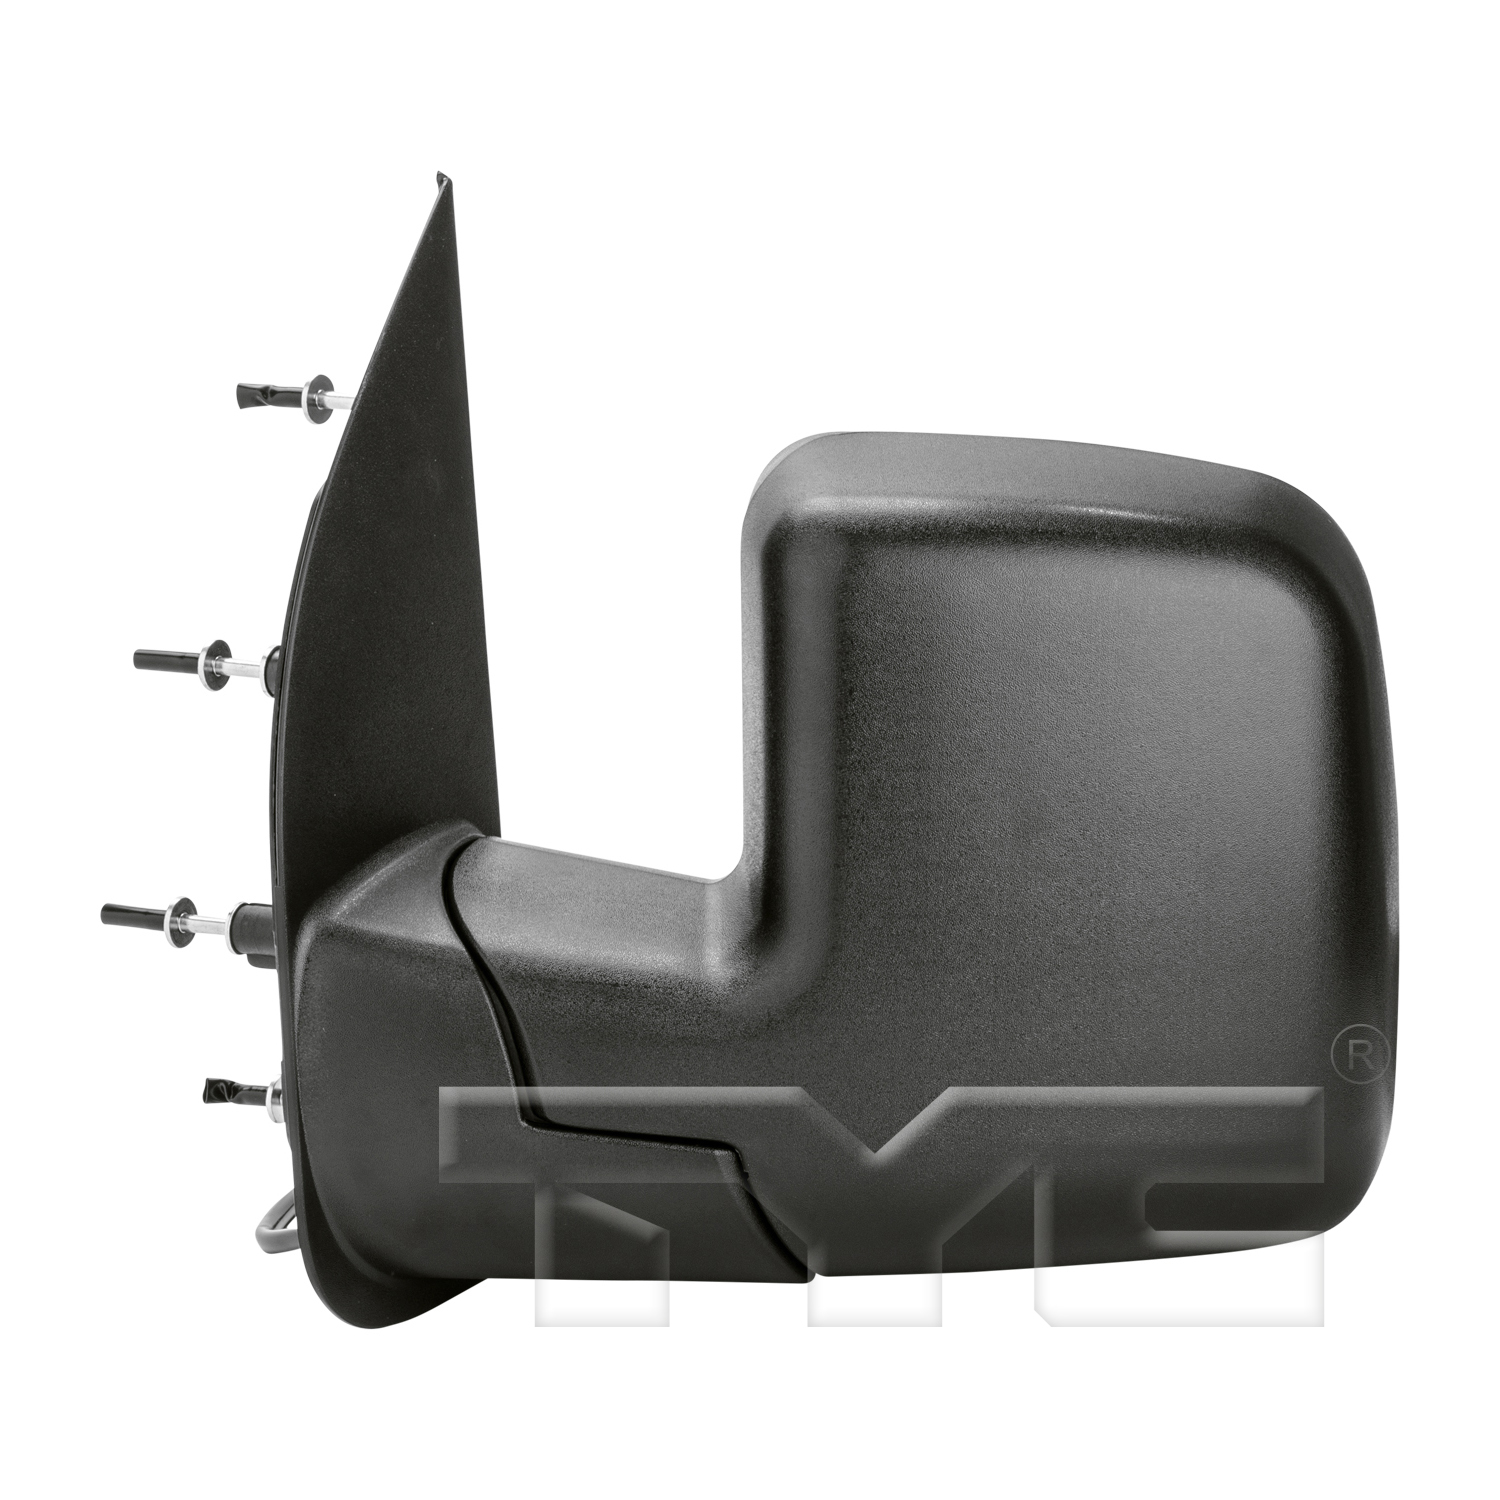 Aftermarket MIRRORS for FORD - E-550 SUPER DUTY, E-550 SUPER DUTY,03-03,LT Mirror outside rear view